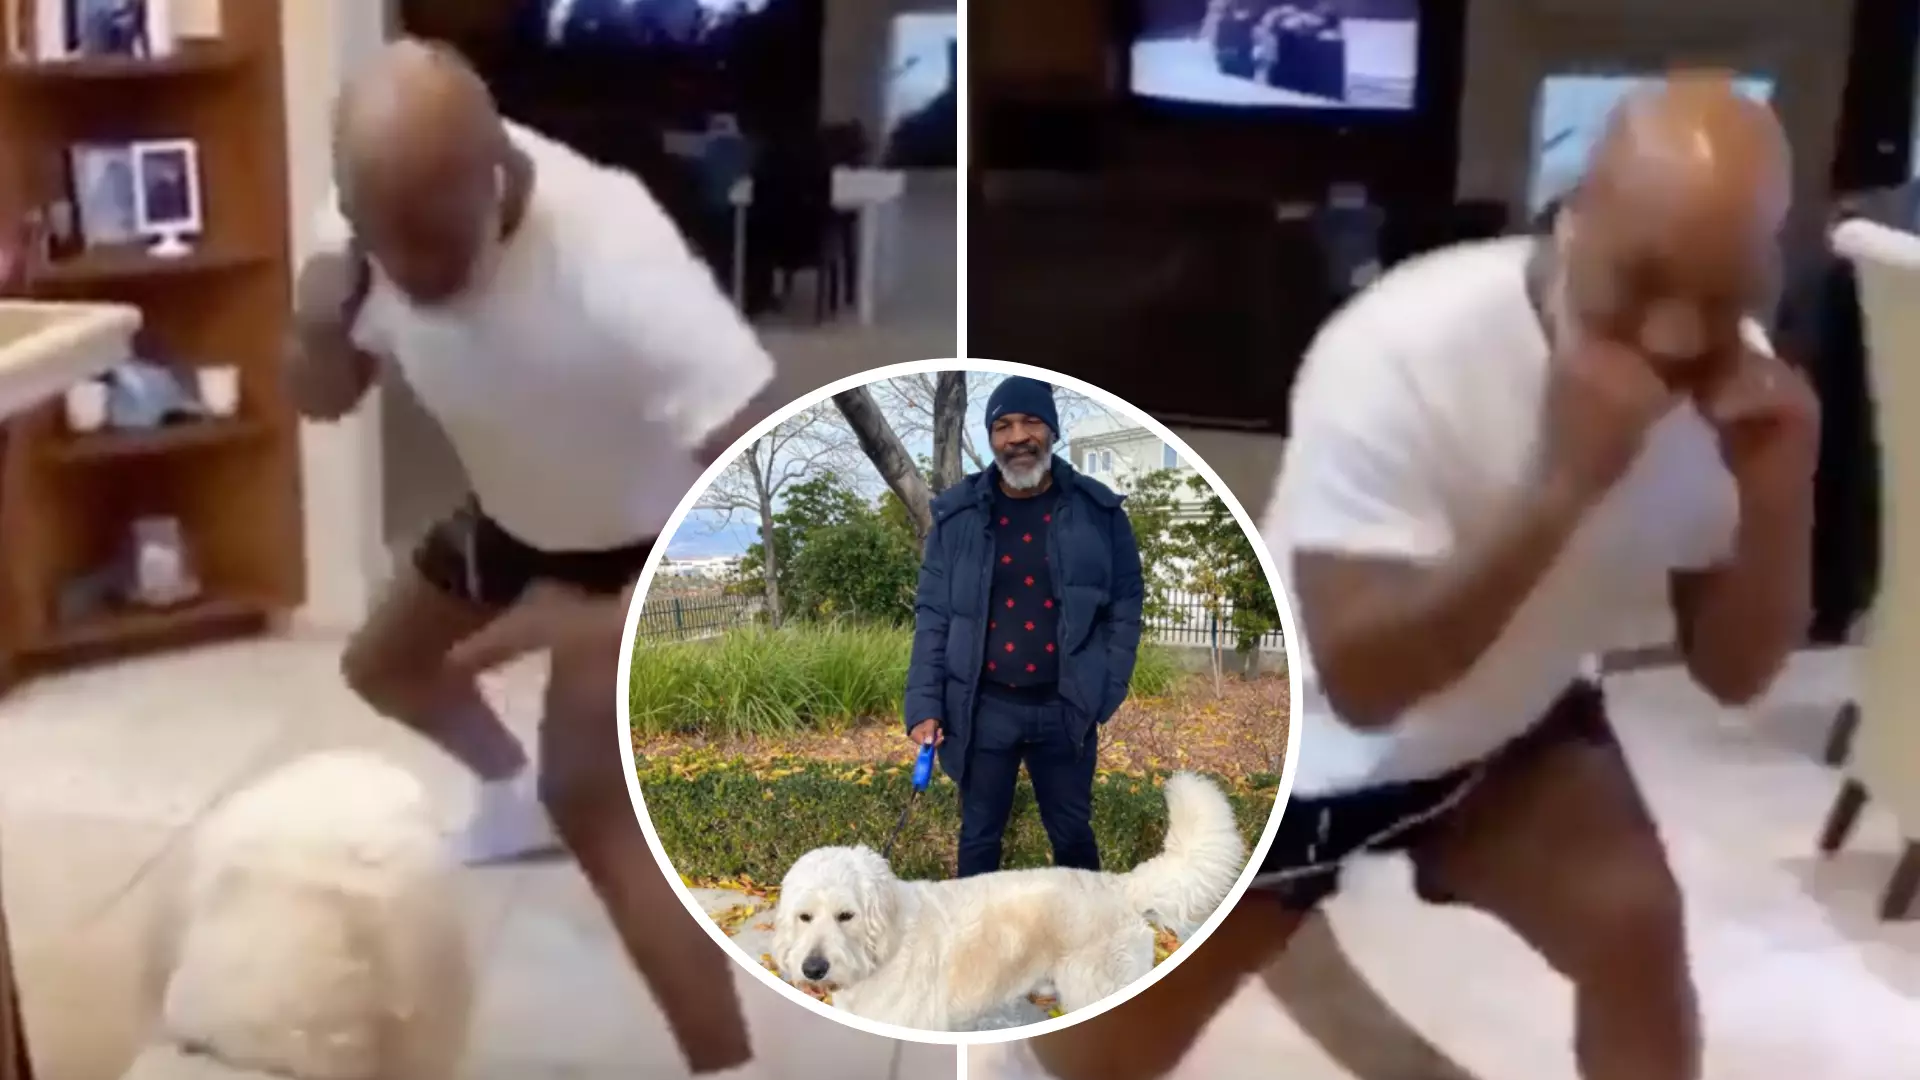 53-Year-Old Mike Tyson Shows Frightening Speed And Boxing Skills As He Spars With His Dog